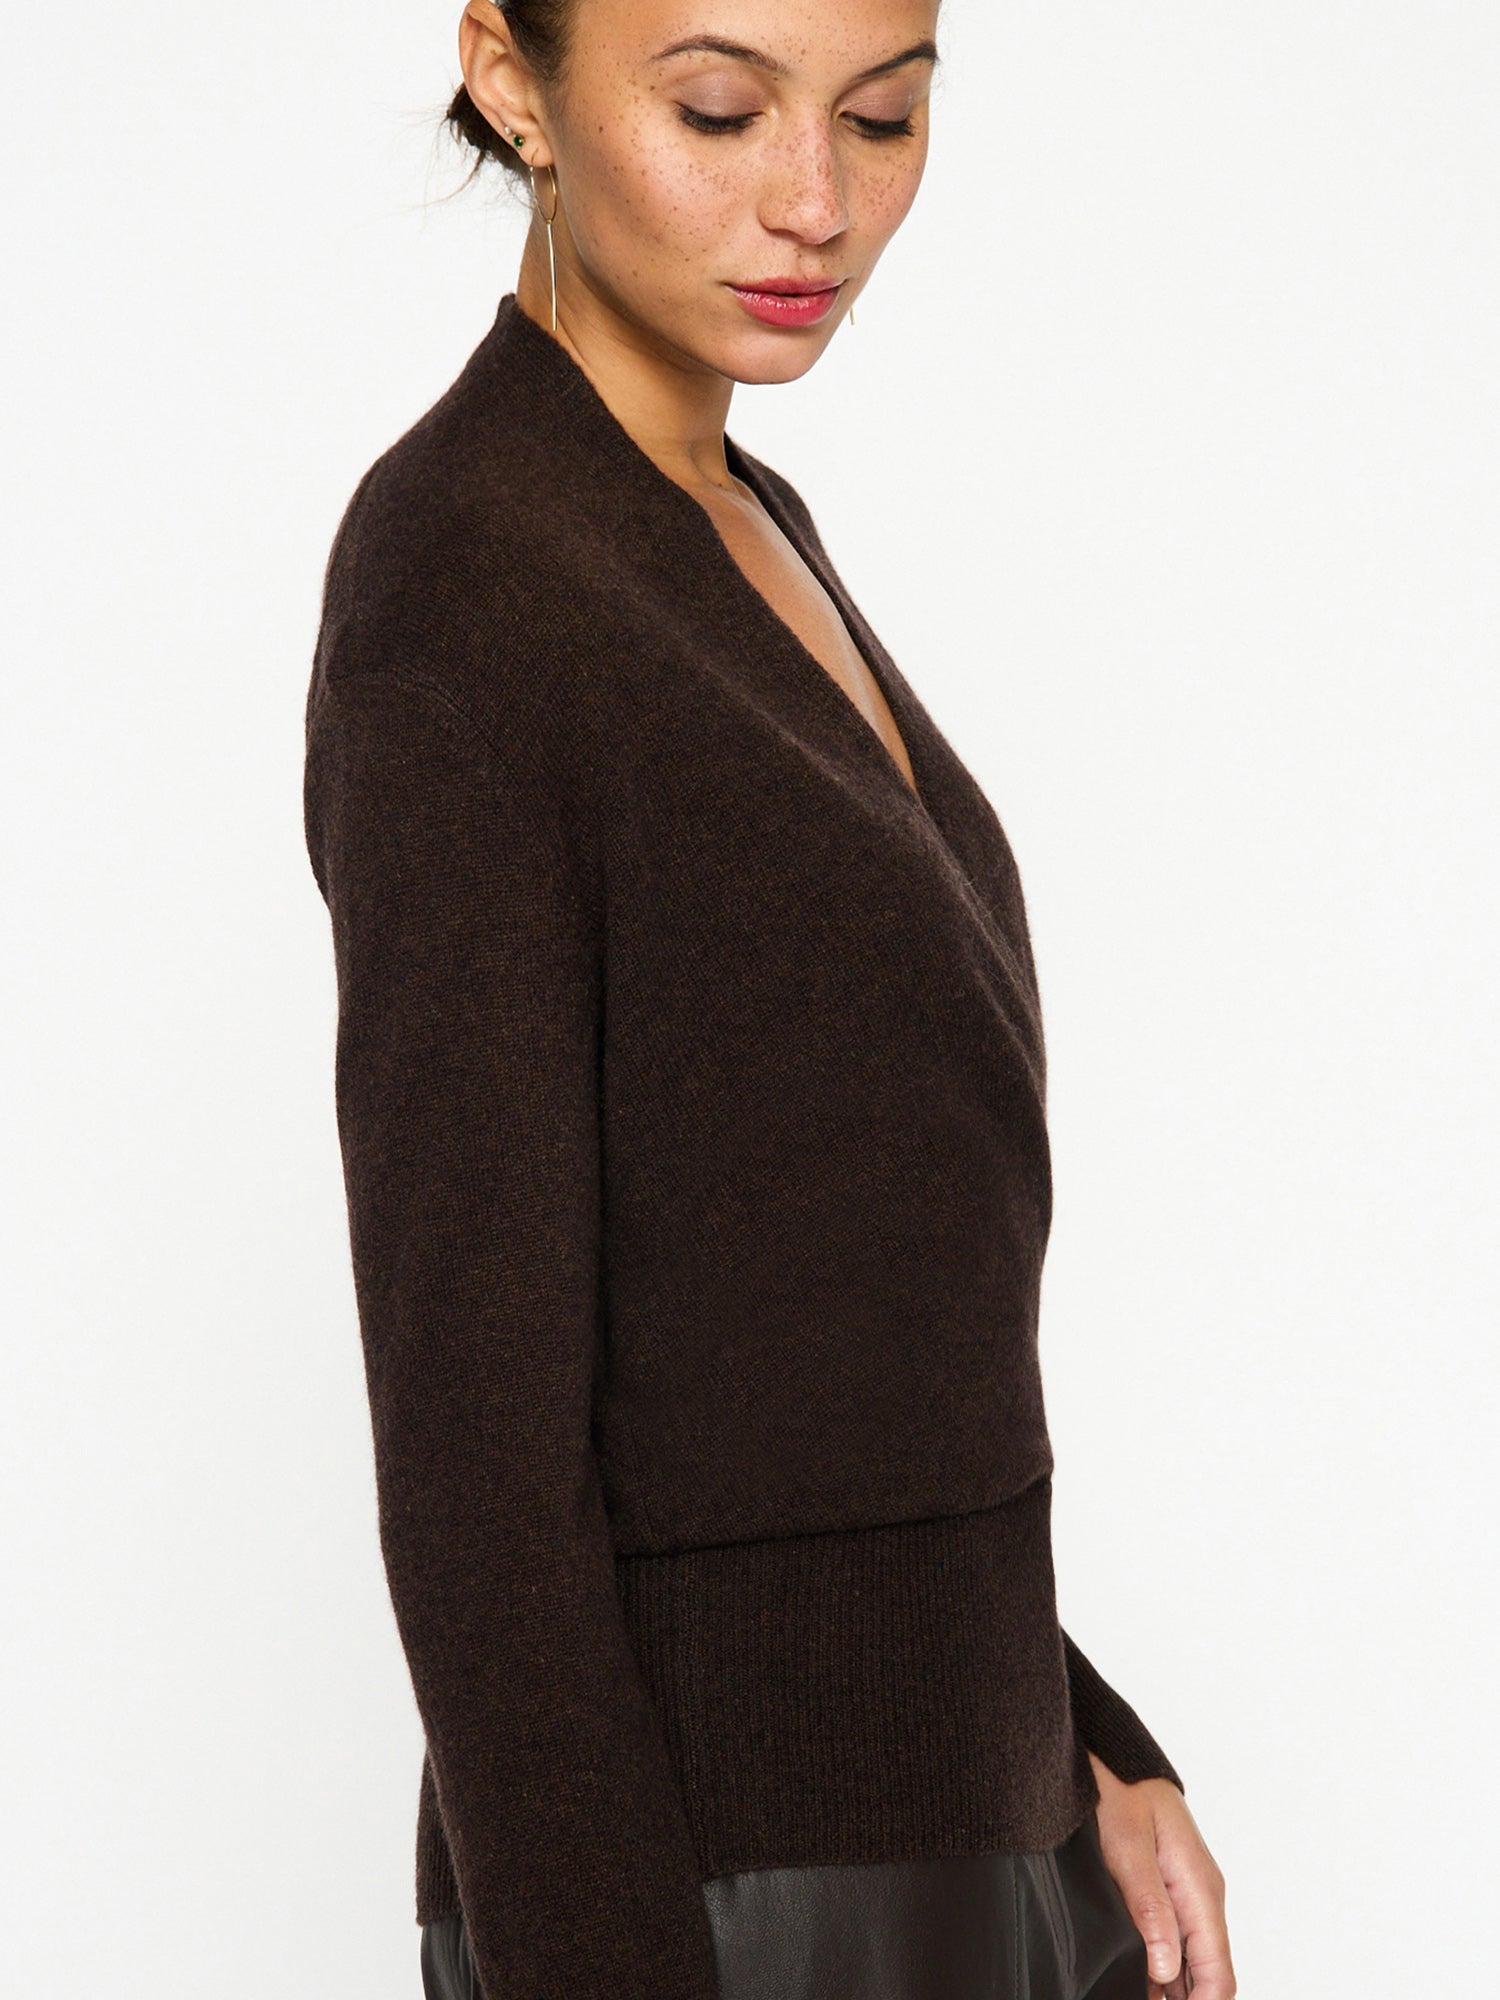 Phinneas cashmere v-neck brown wrap sweater side view